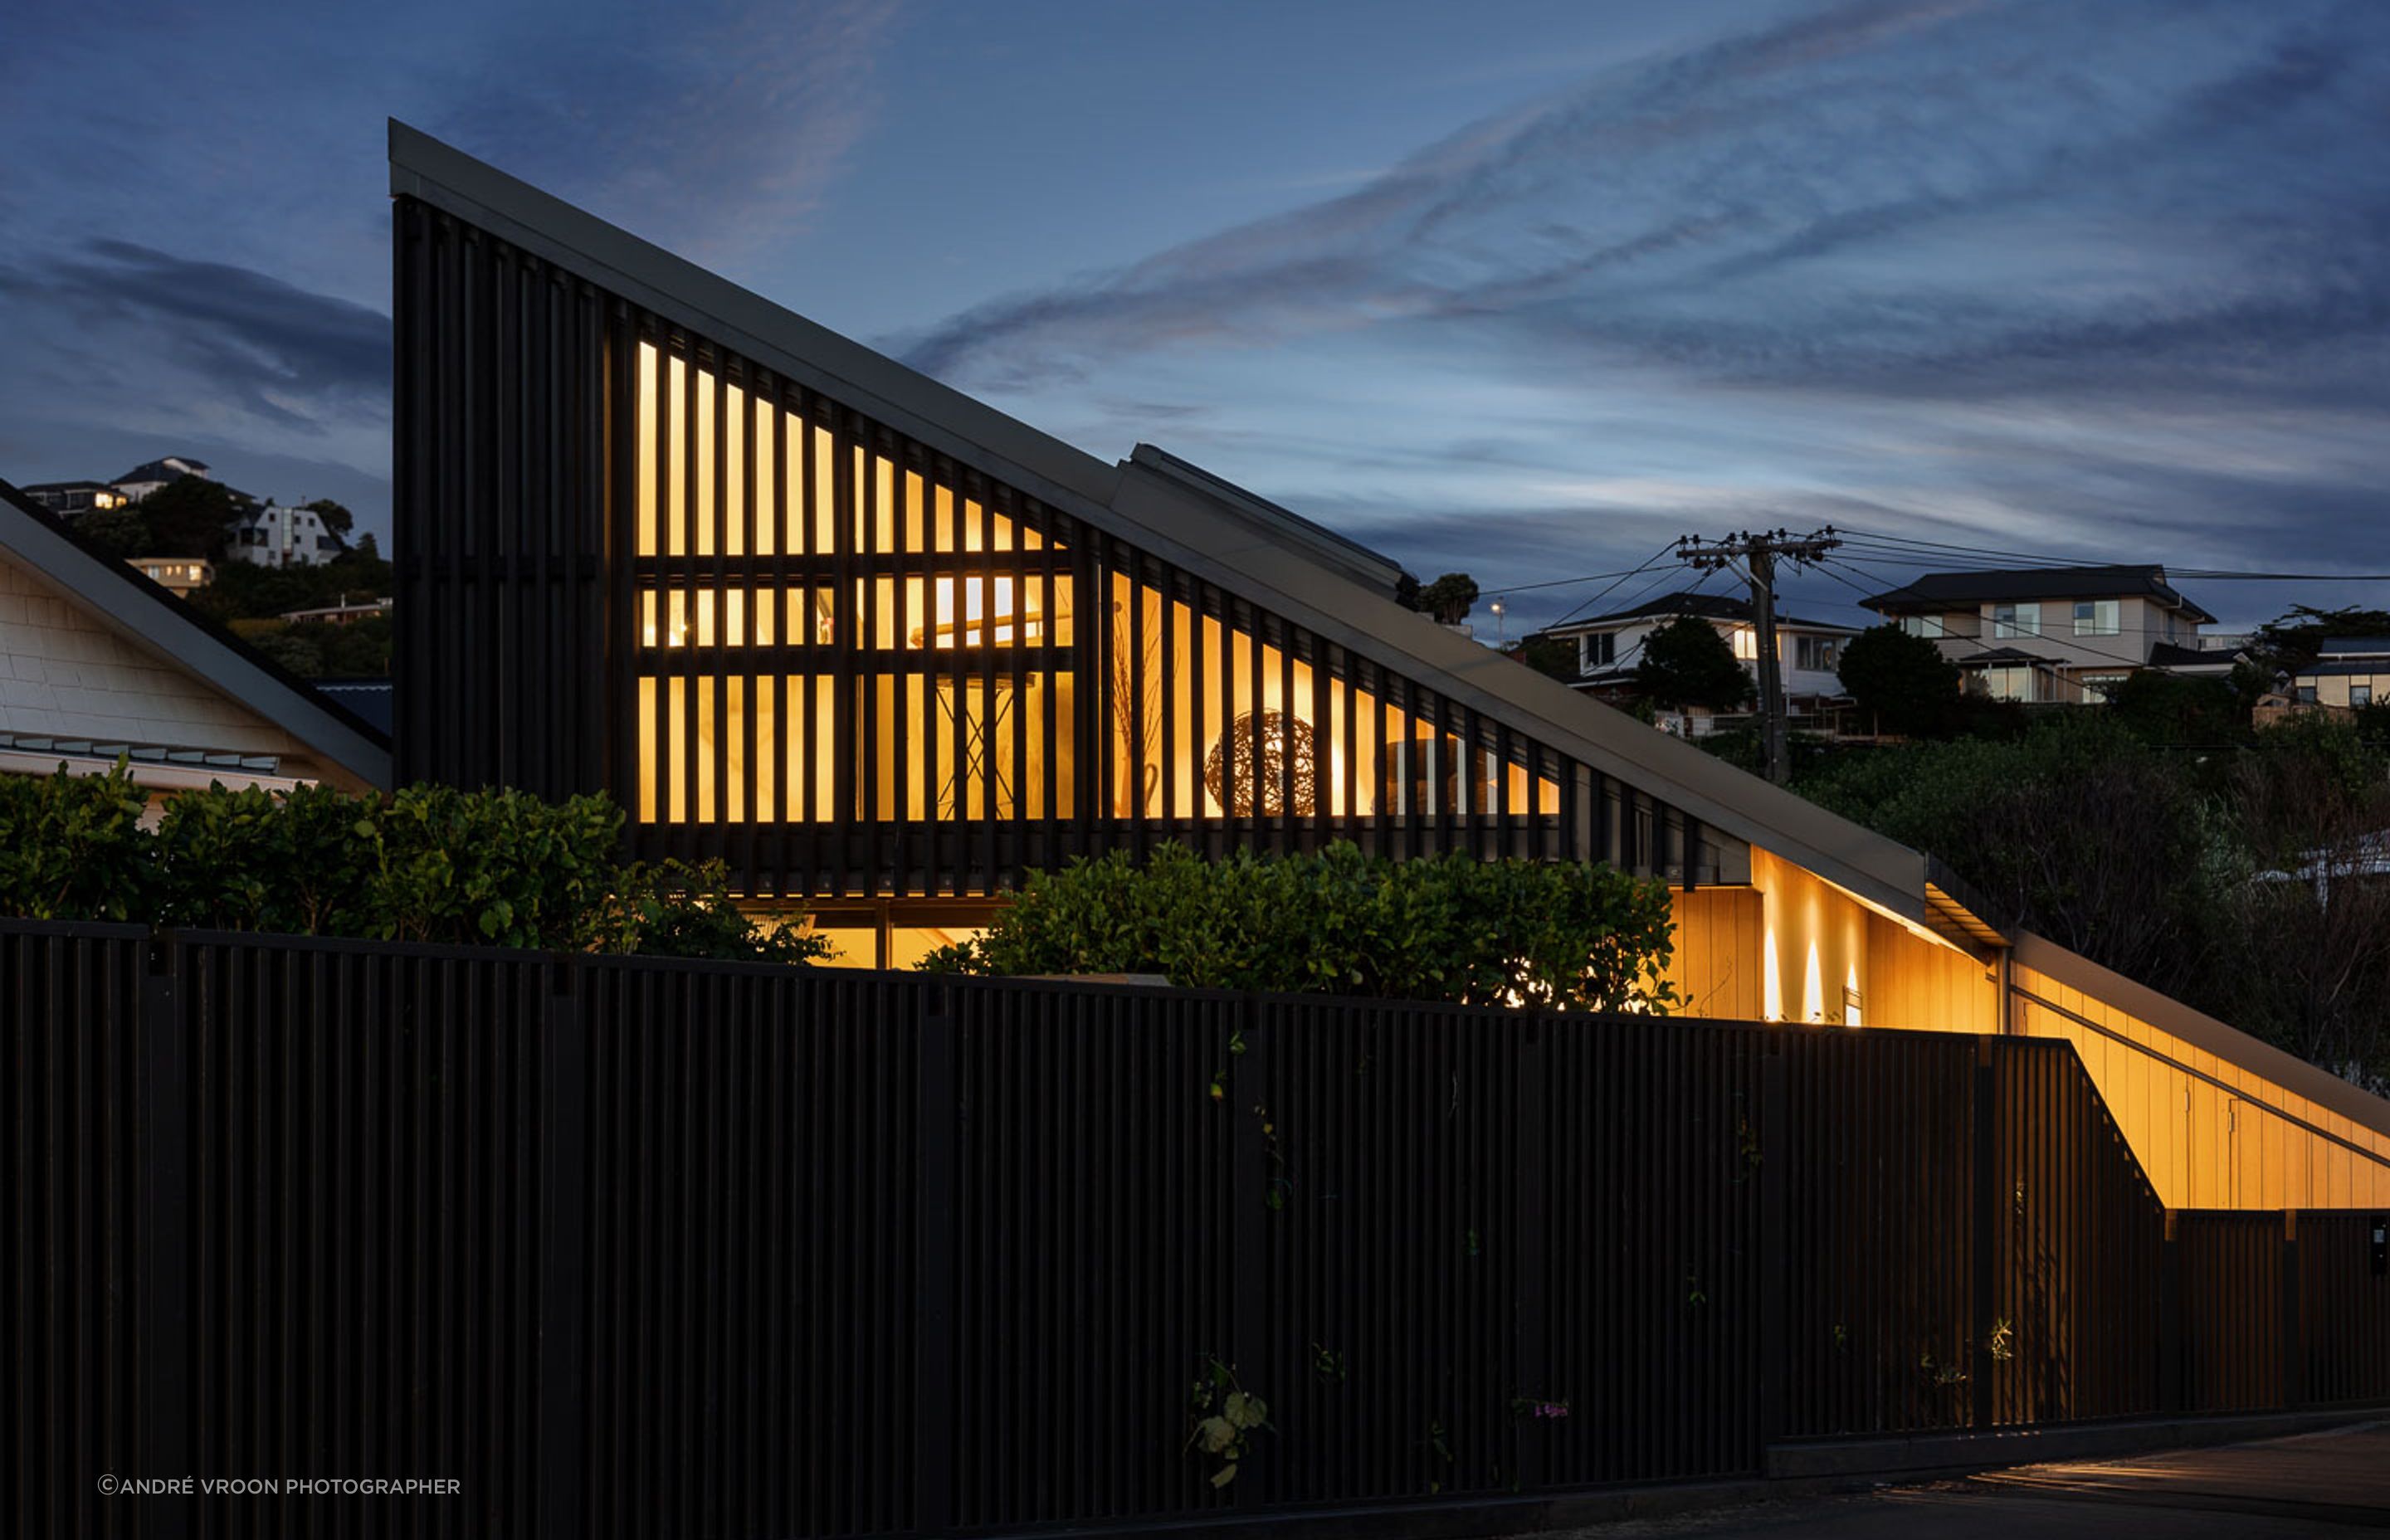 The sharp, angular shape of the home is dramatic when lit up at night.